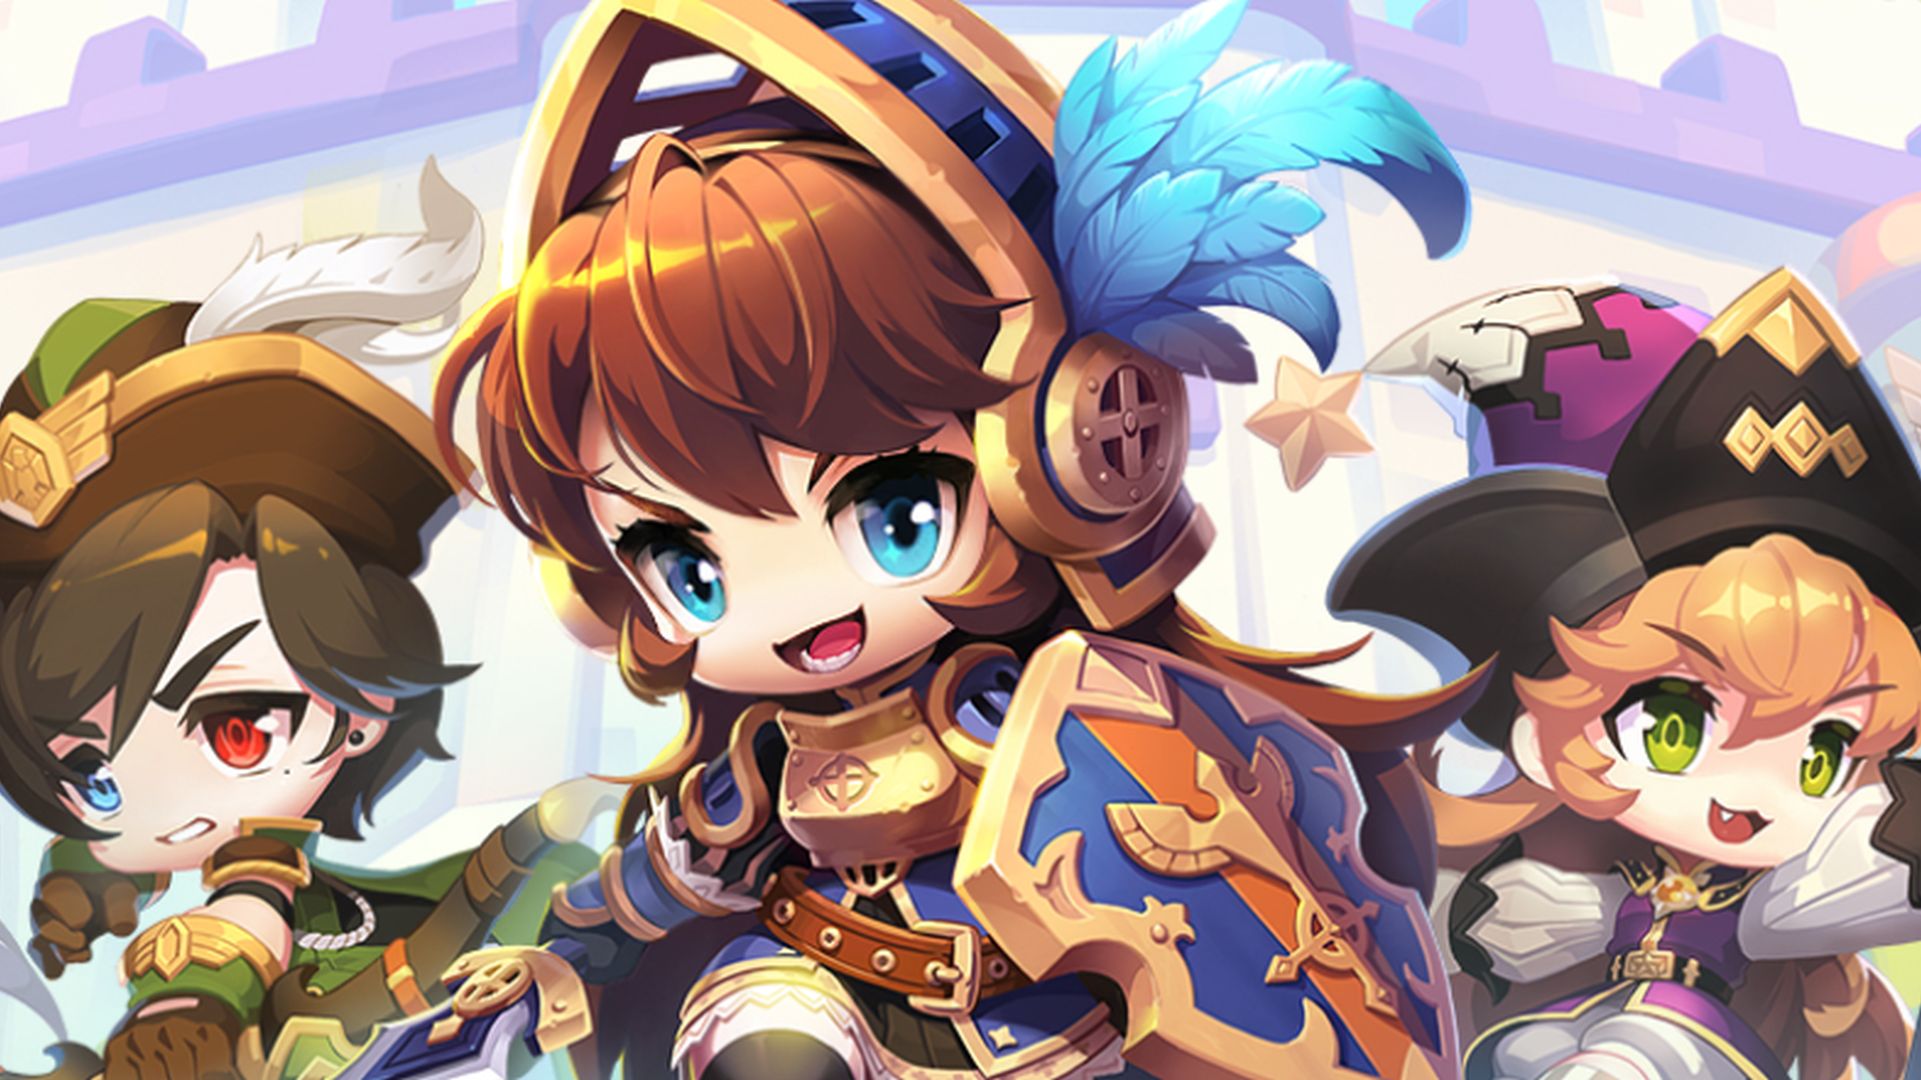 Free games: Win premium account, a majestic unicorn, and more in our MapleStory 2 giveaway ...